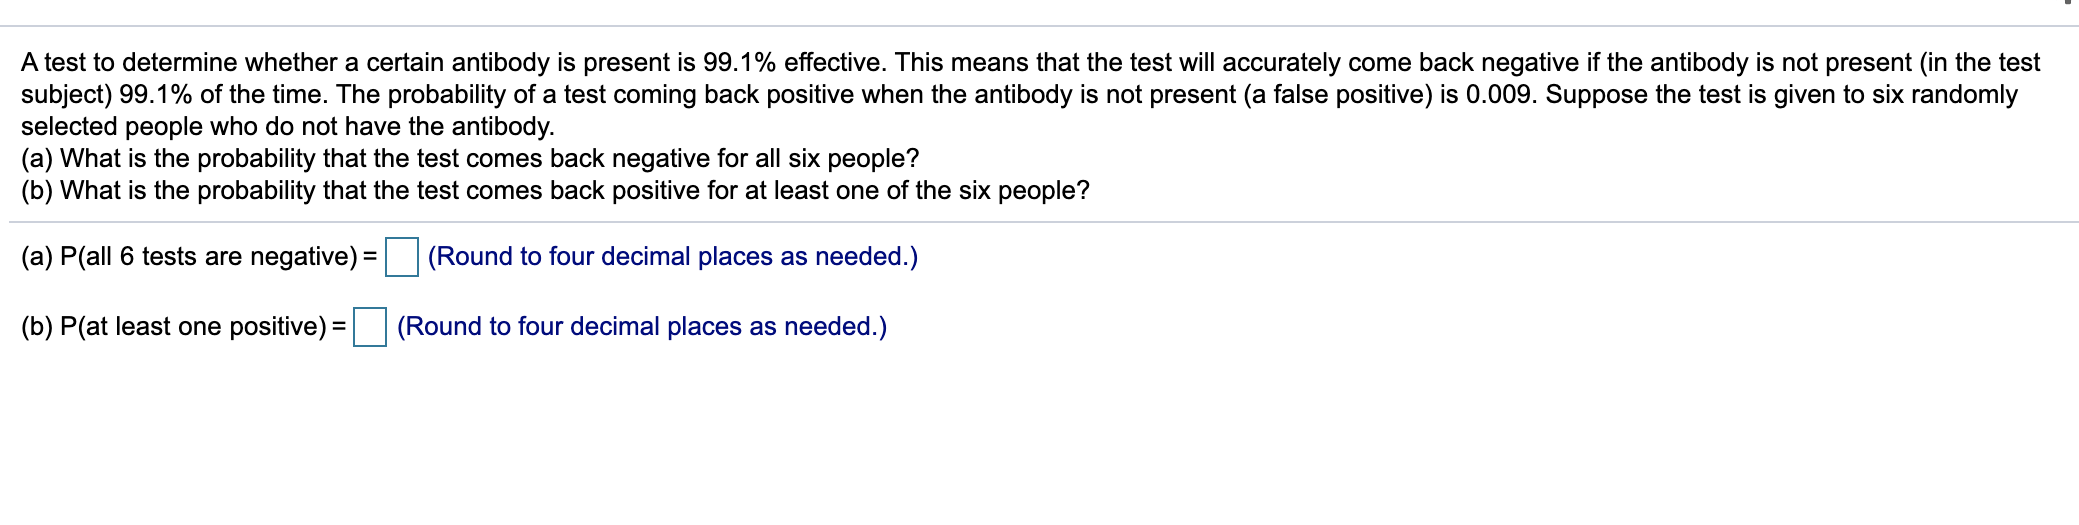 A test to determine whether a certain antibody is present is 99.1% effective. This means that the test will accurately come back negative if the antibody is not present (in the test
subject) 99.1% of the time. The probability of a test coming back positive when the antibody is not present (a false positive) is 0.009. Suppose the test is given to six randomly
selected people who do not have the antibody.
(a) What is the probability that the test comes back negative for all six people?
(b) What is the probability that the test comes back positive for at least one of the six people?
(a) P(all 6 tests are negative) = (Round to four decimal places as needed.)
%3D
(b) P(at least one positive) =
(Round to four decimal places as needed.)
